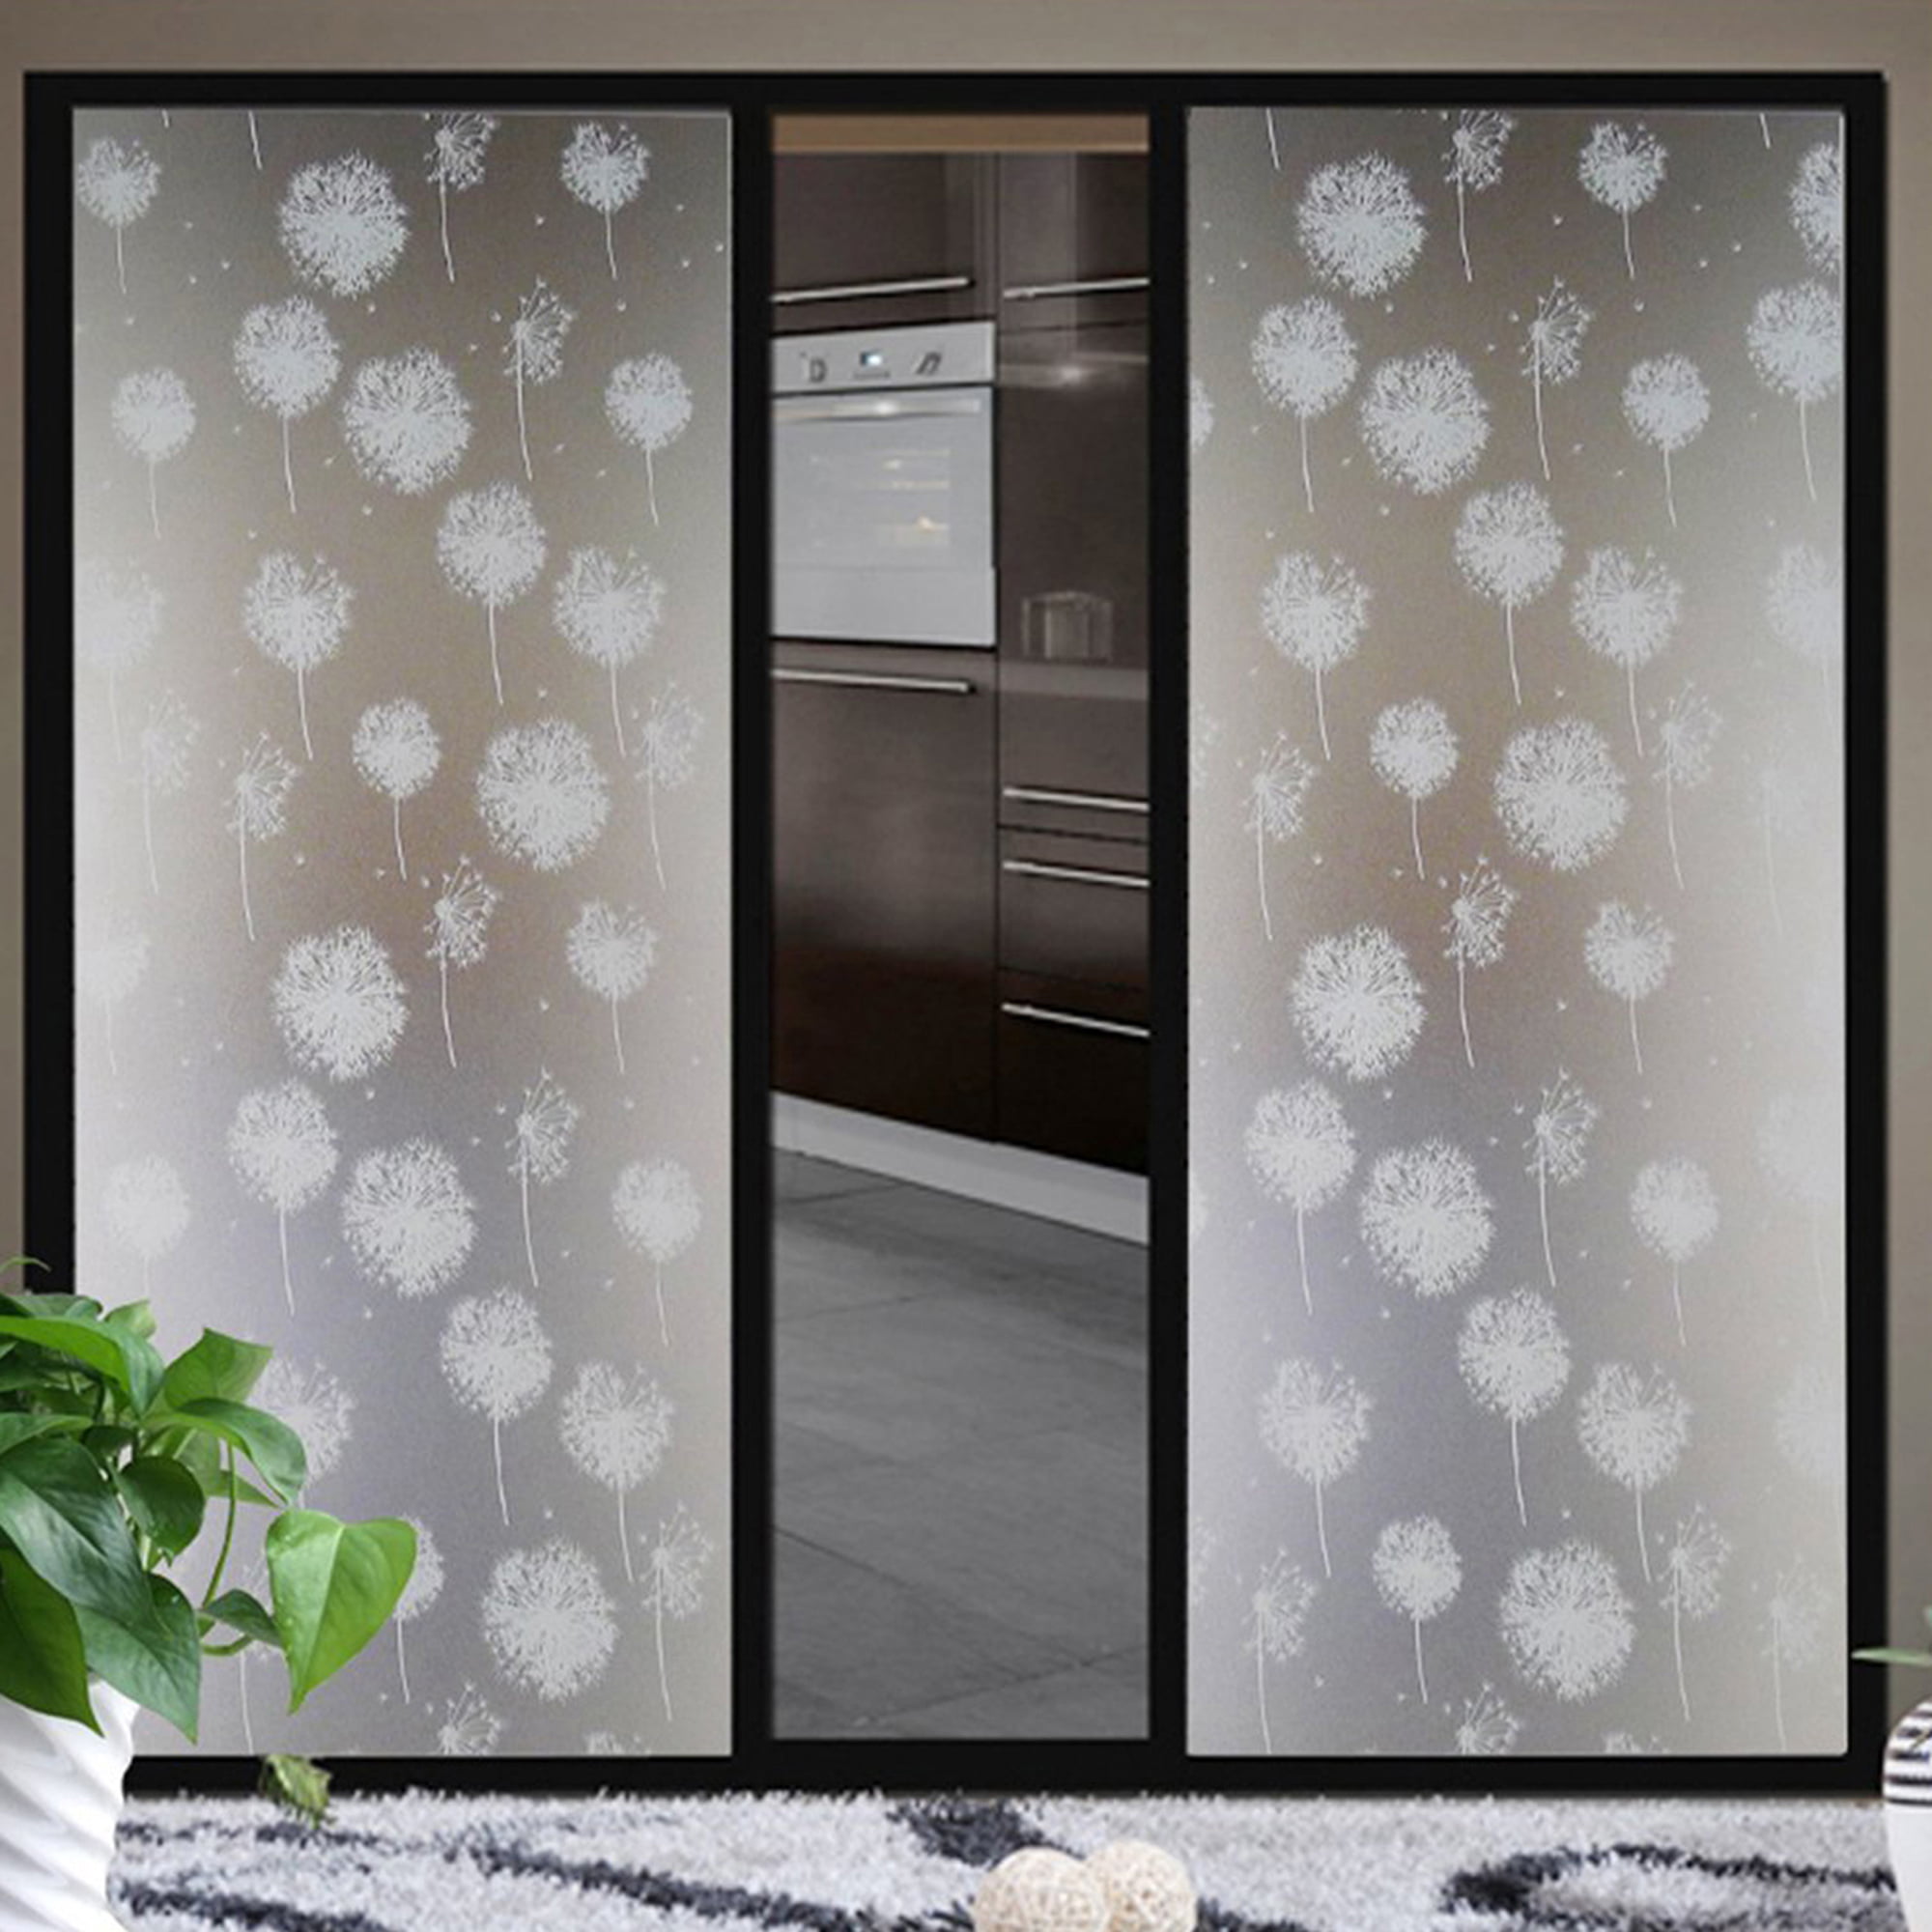 45 x 200cm Frosted Privacy Home Bathroom Window Glass Self-Adhesive Film Sticker 